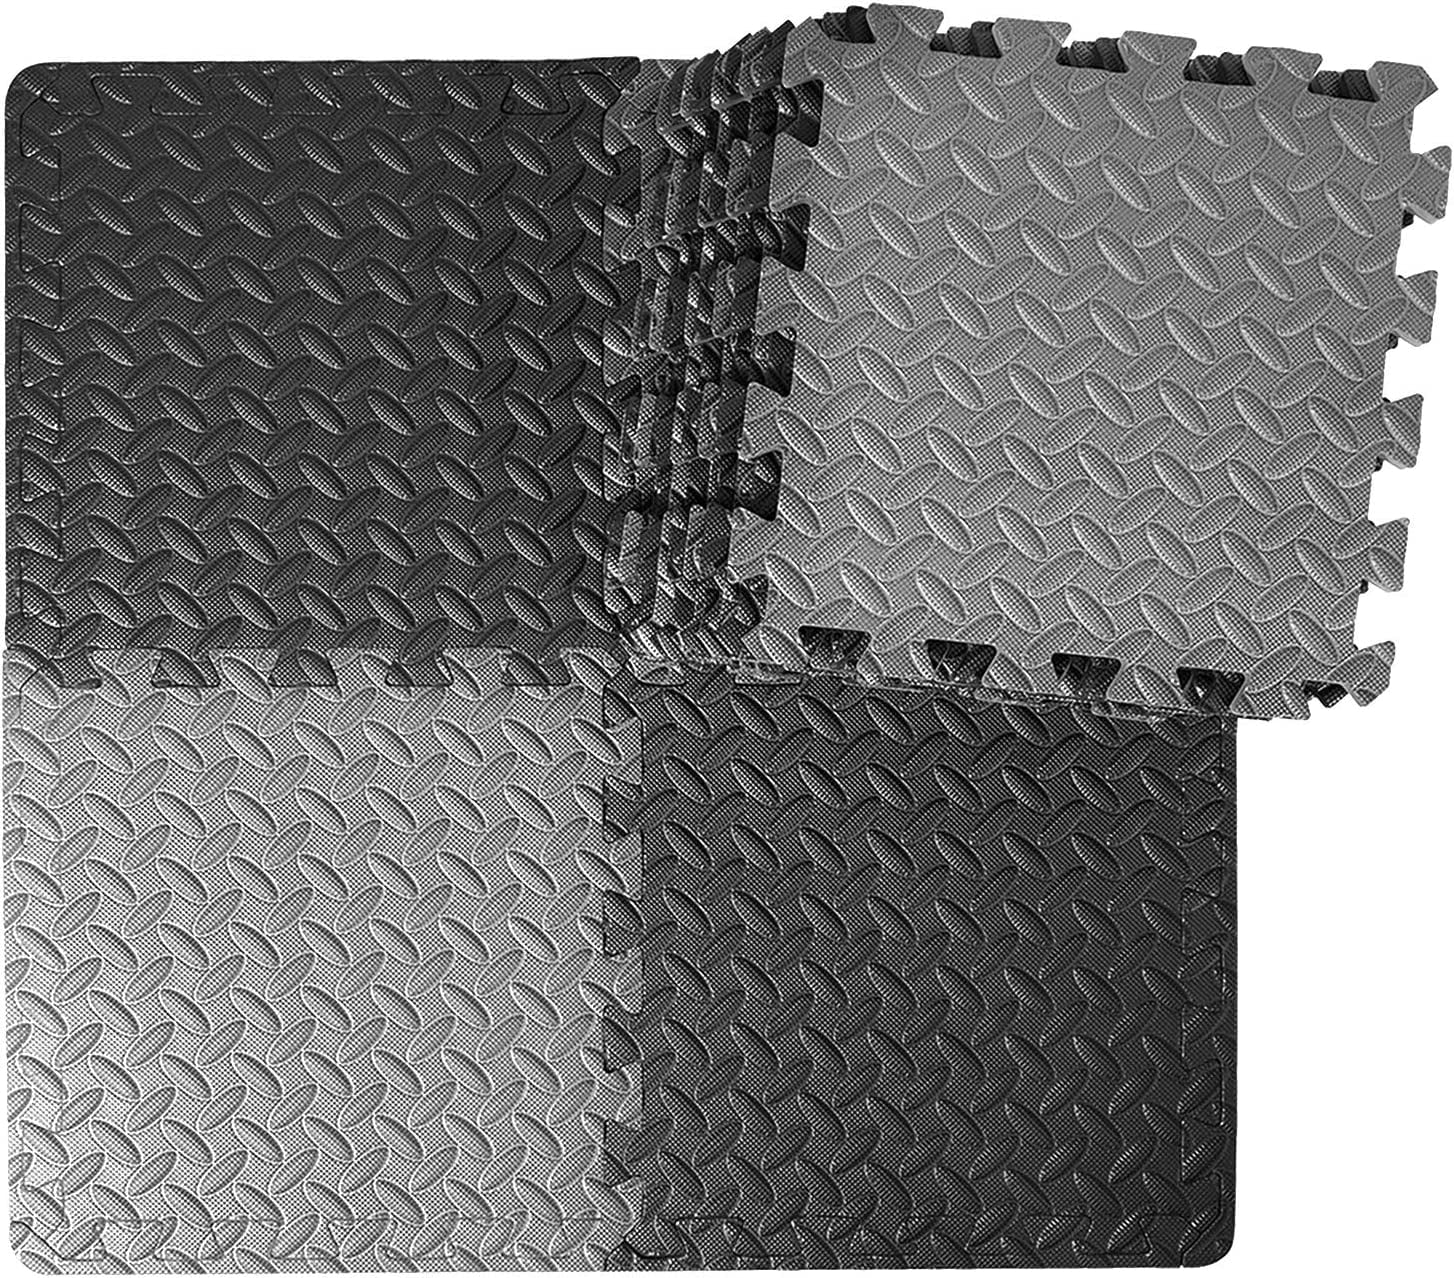 Yes4All 12 pcs Interlocking Exercise Foam Mats, Cover 48 sqft, 3/8 inch,  Black and Gray Color